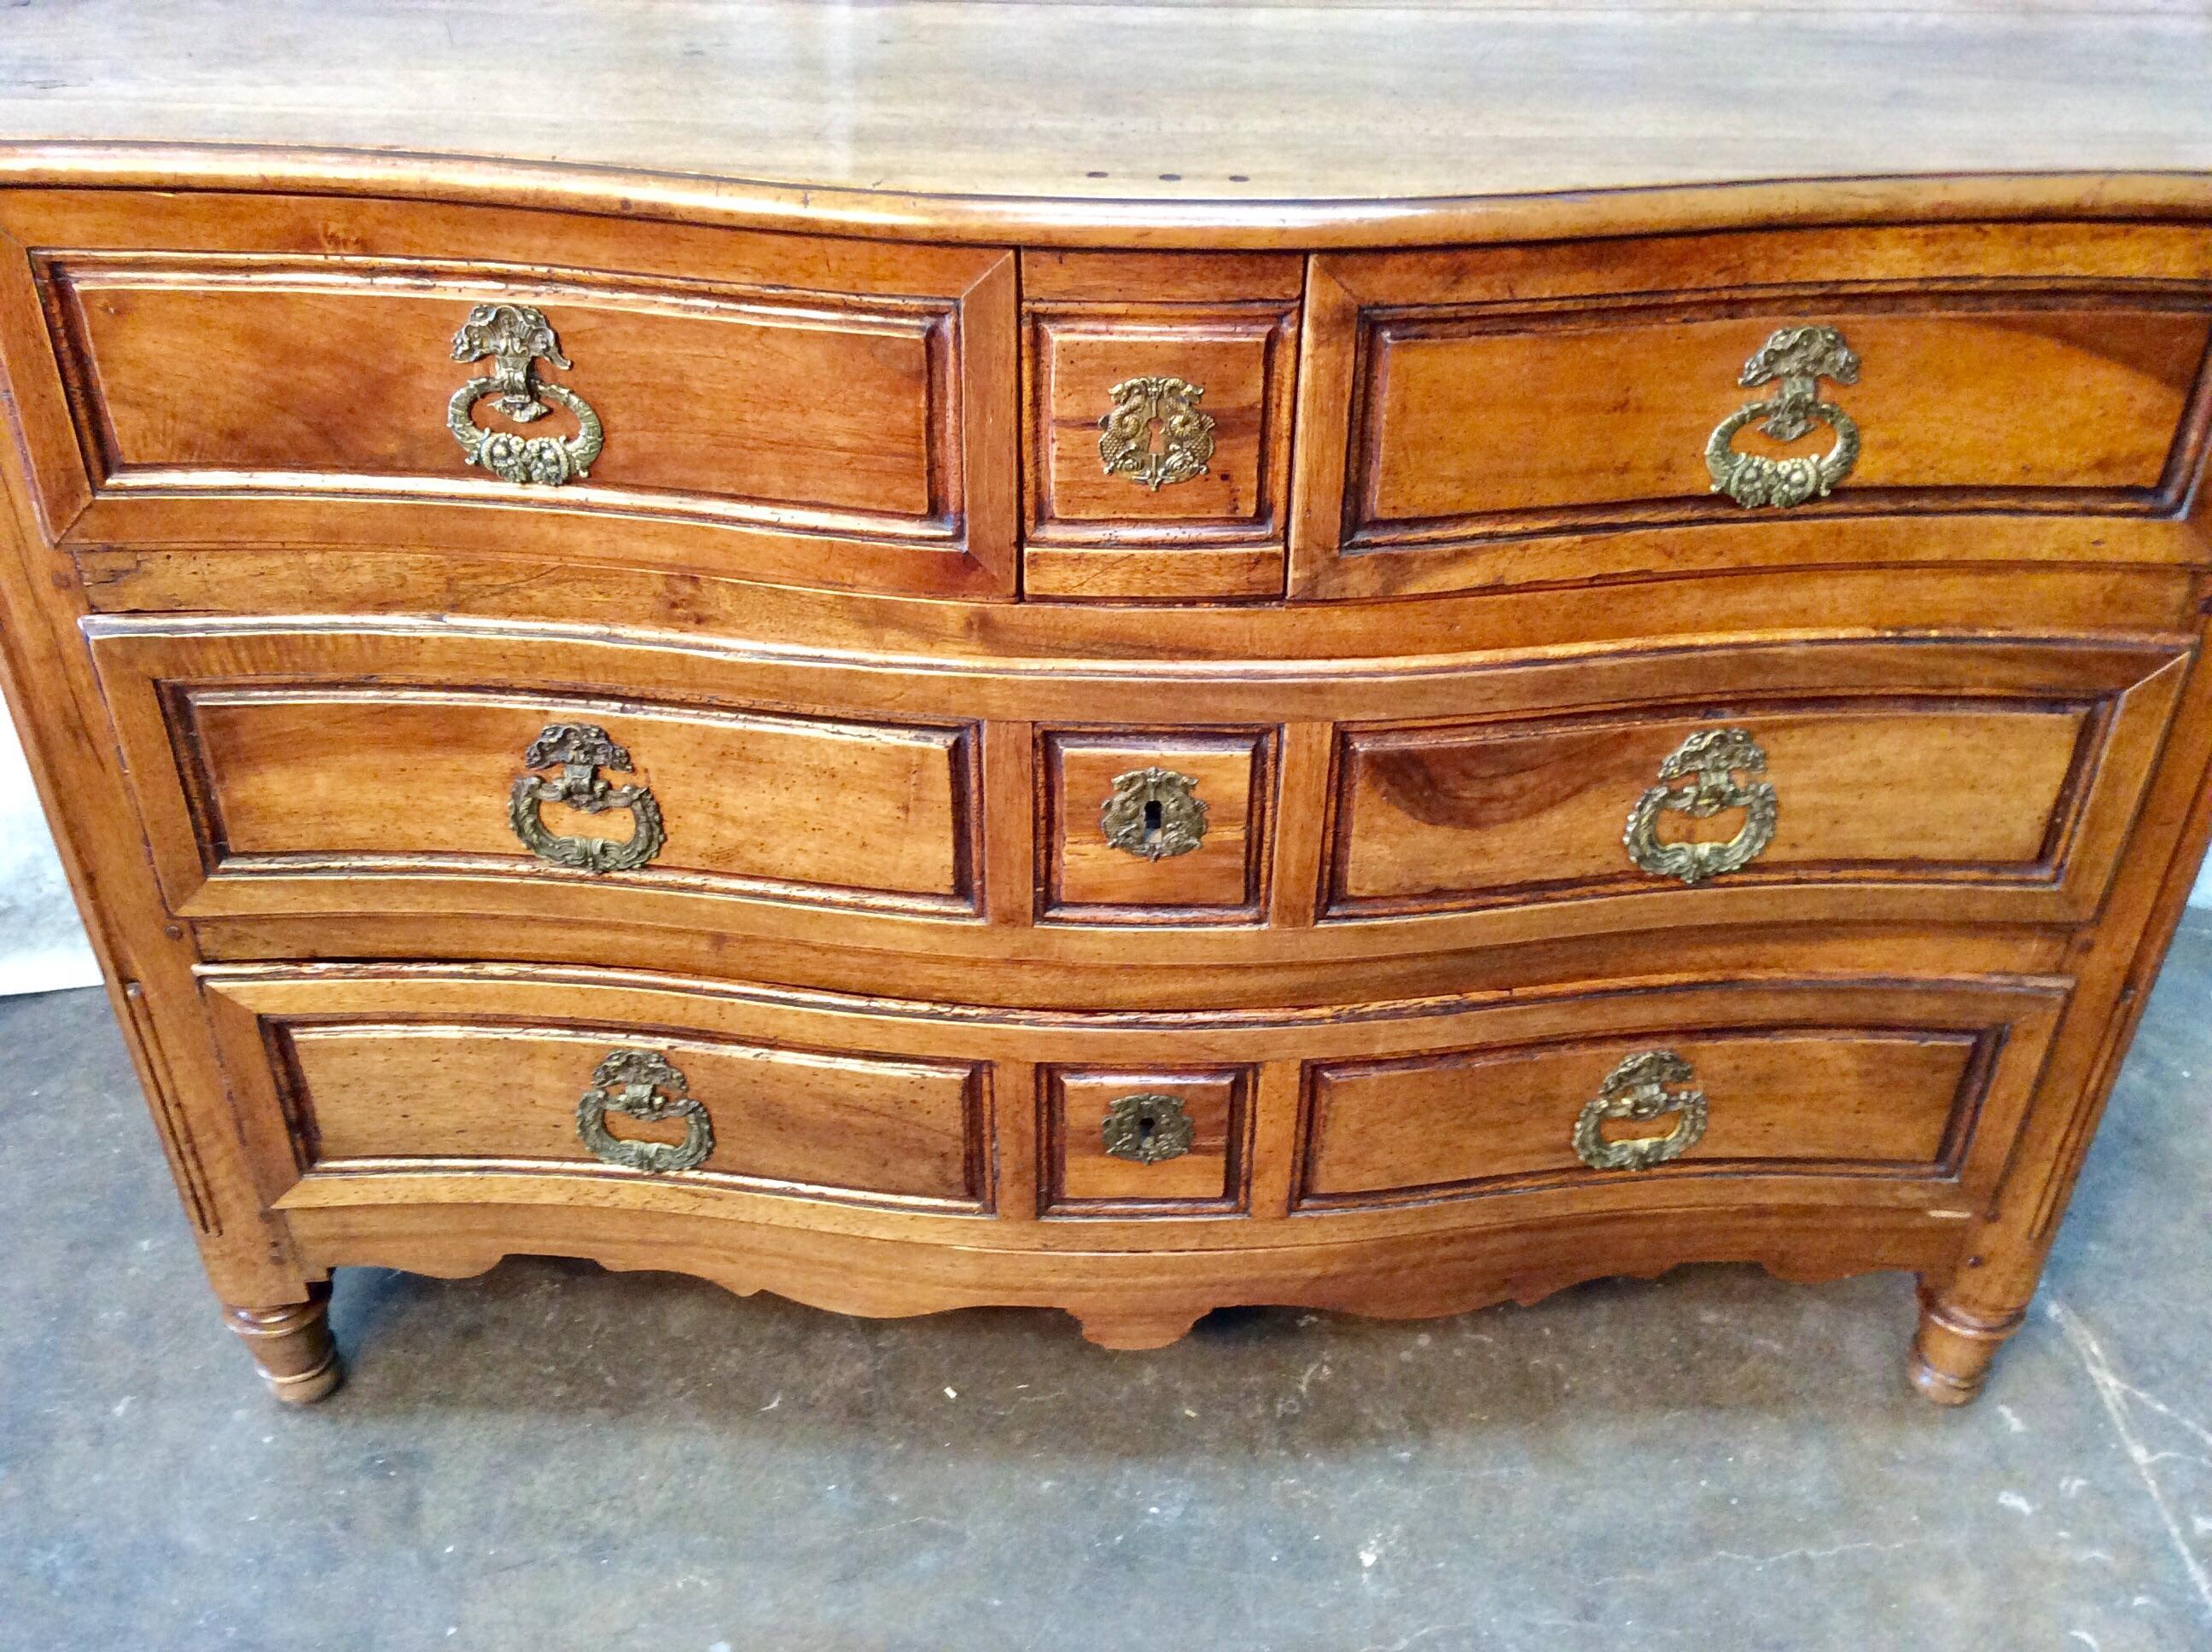 1800s French Walnut Four Drawer Commode In Good Condition For Sale In Burton, TX